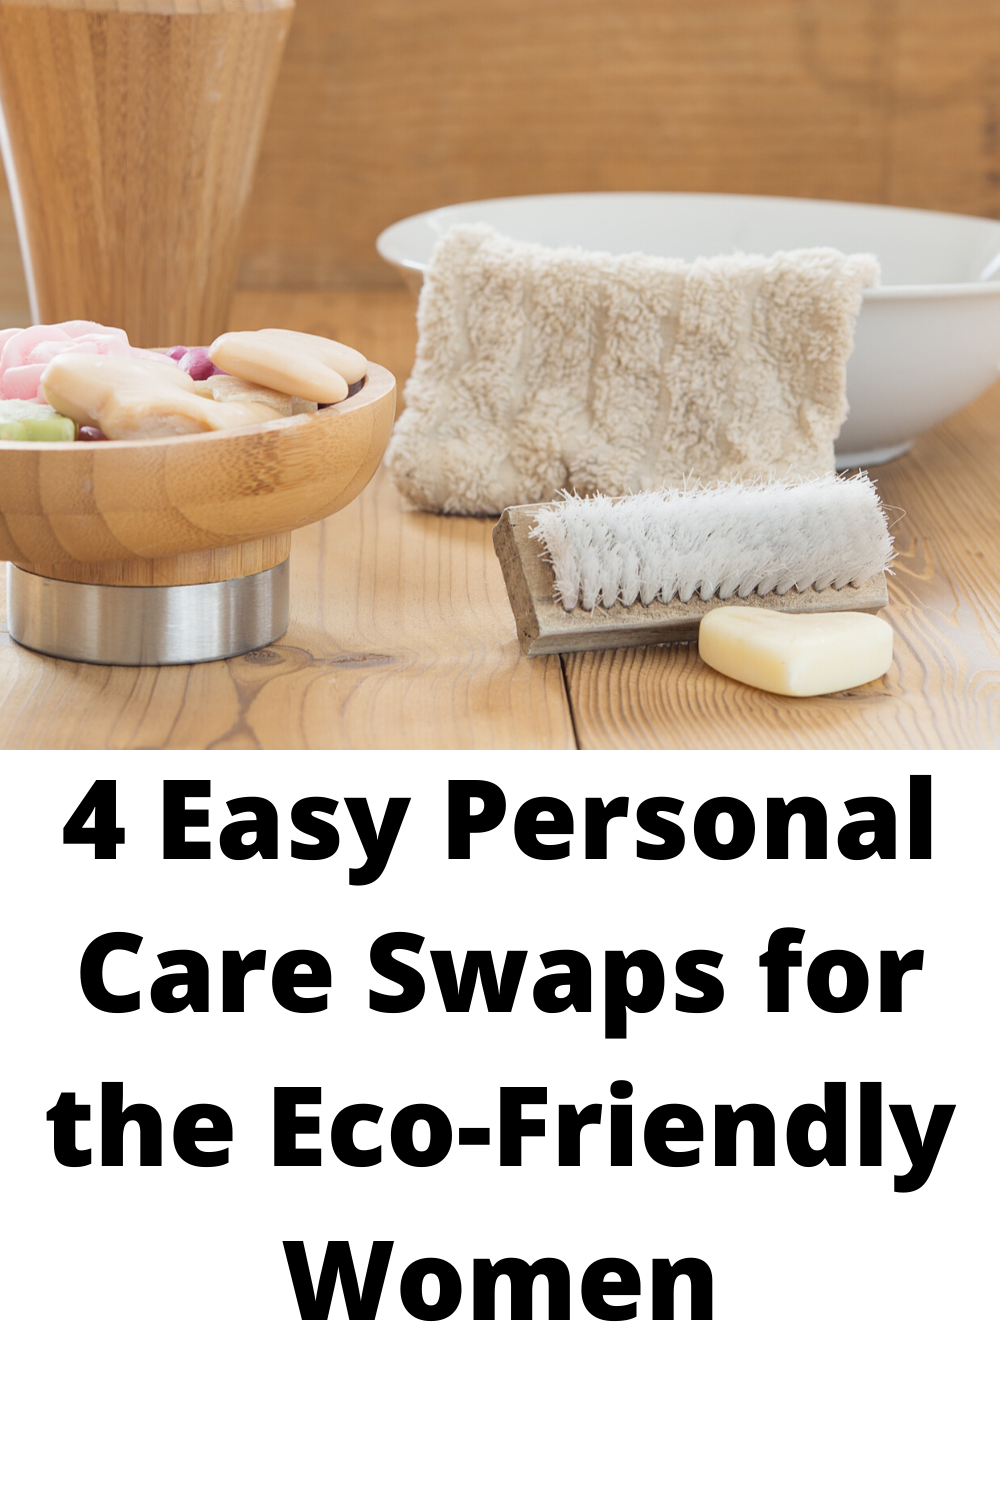 4 Easy Personal Care changes to be Eco-Friendly